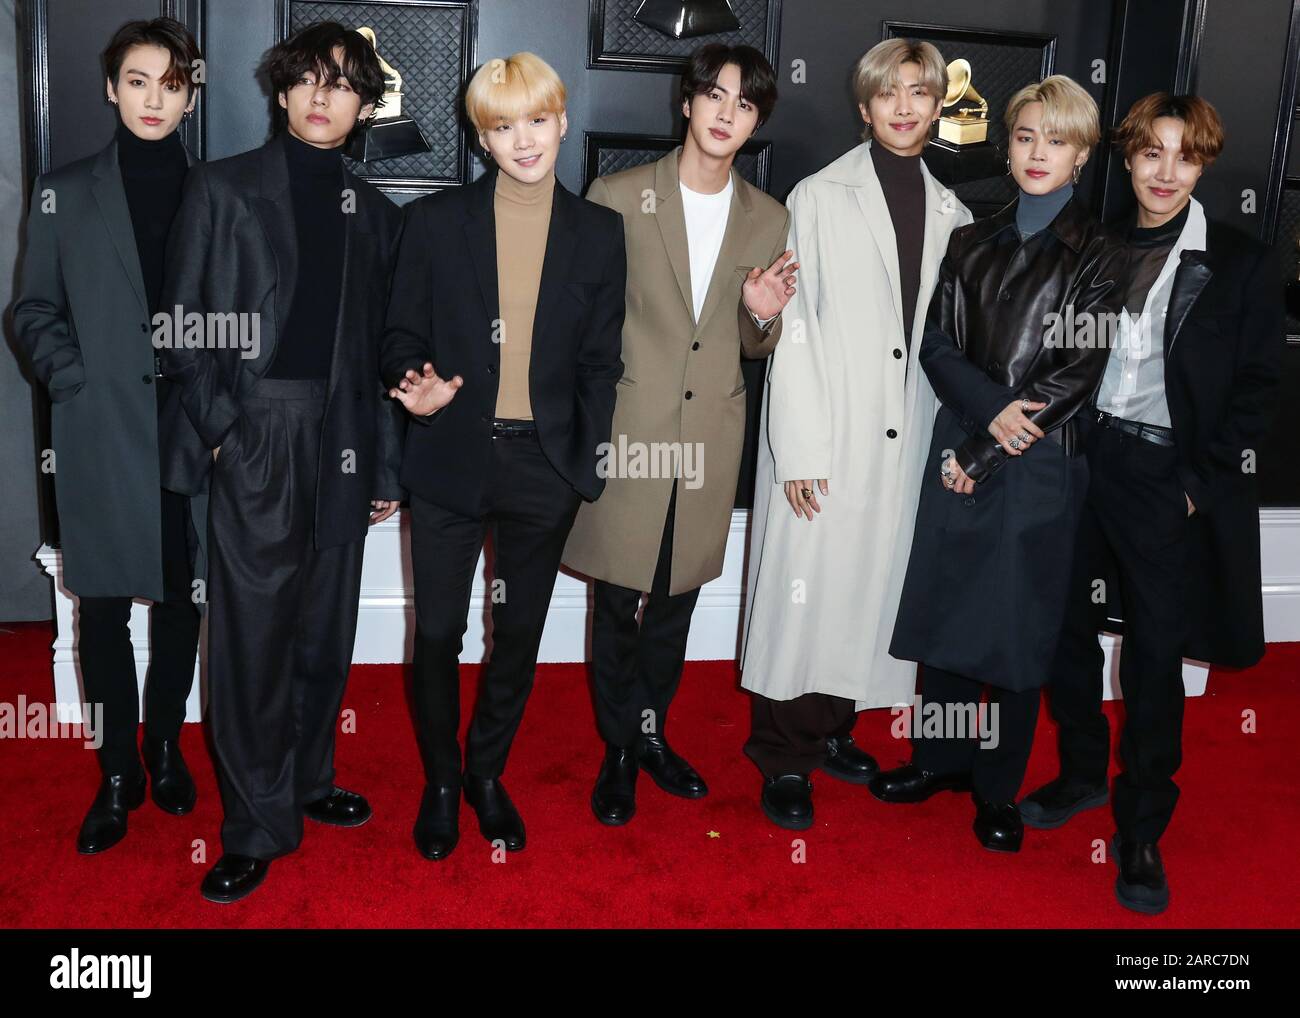 Los Angeles, California, Usa - January 26: Rm, V, Suga, Jin, Jimin, Jungkook  And J-Hope Of Bts Arrive At The 62Nd Annual Grammy Awards Held At Staples  Center On January 26, 2020